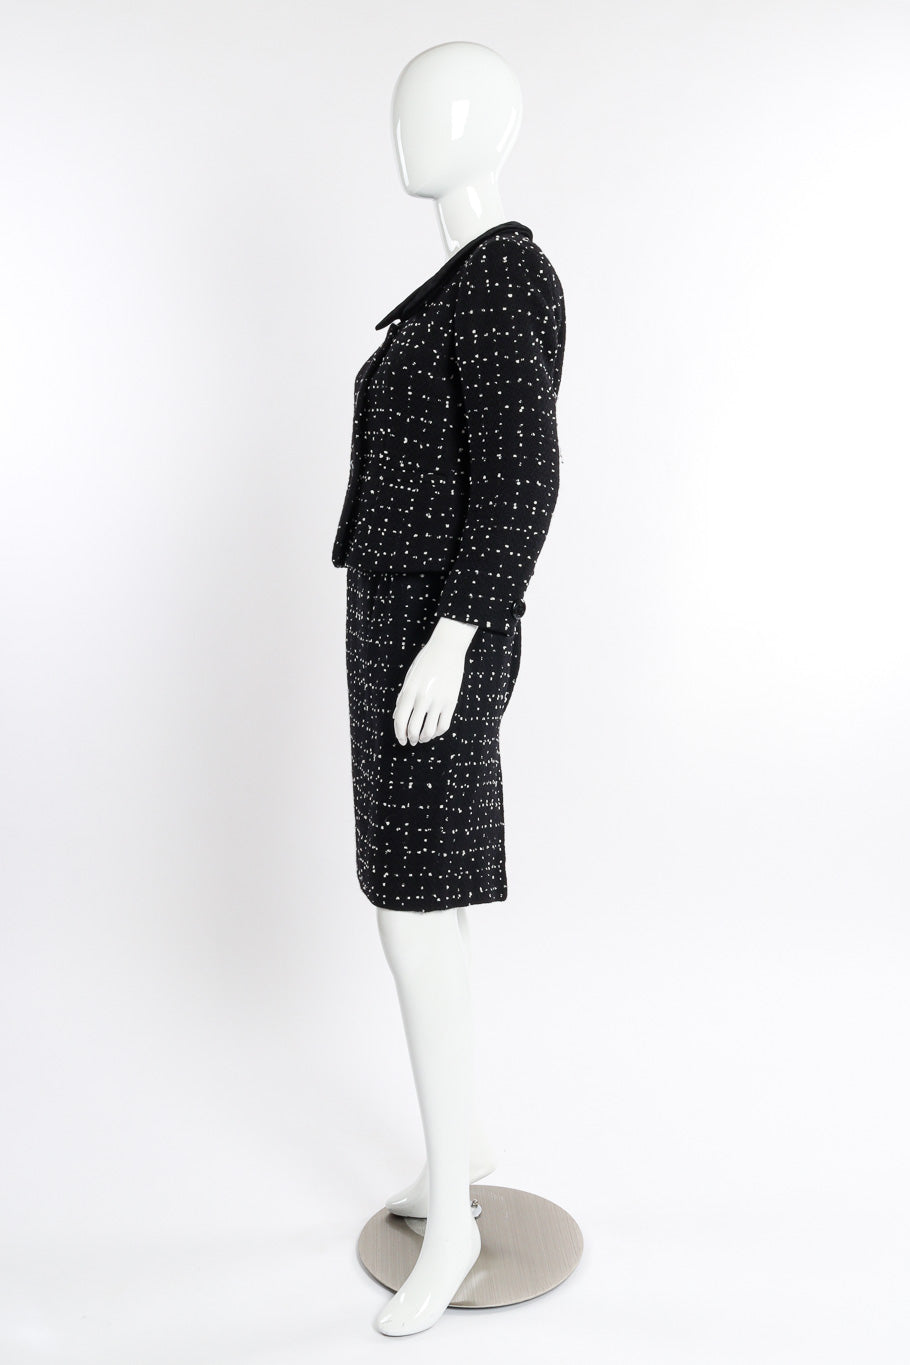 Vintage Moschino Dot Bouclé Jacket and Skirt Set side view on mannequin @recessla